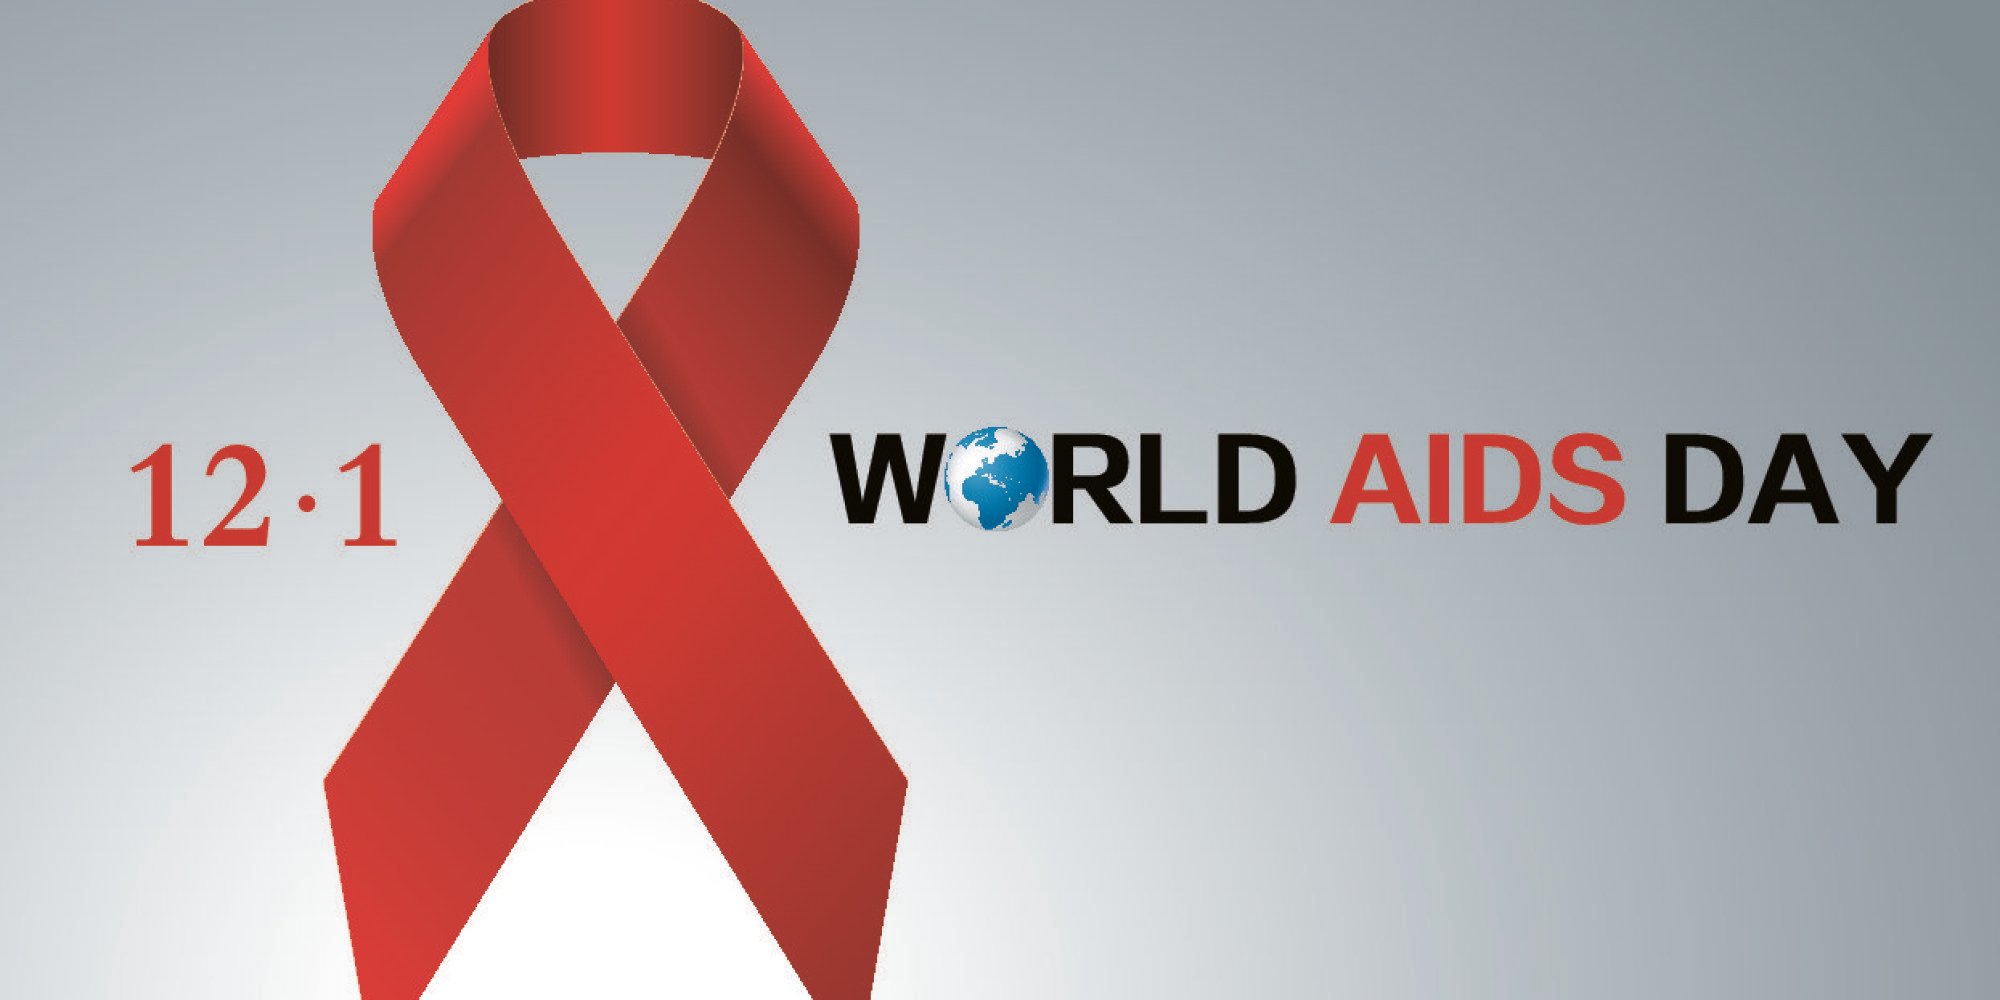 Best World Aids Day Wish Picture And Image